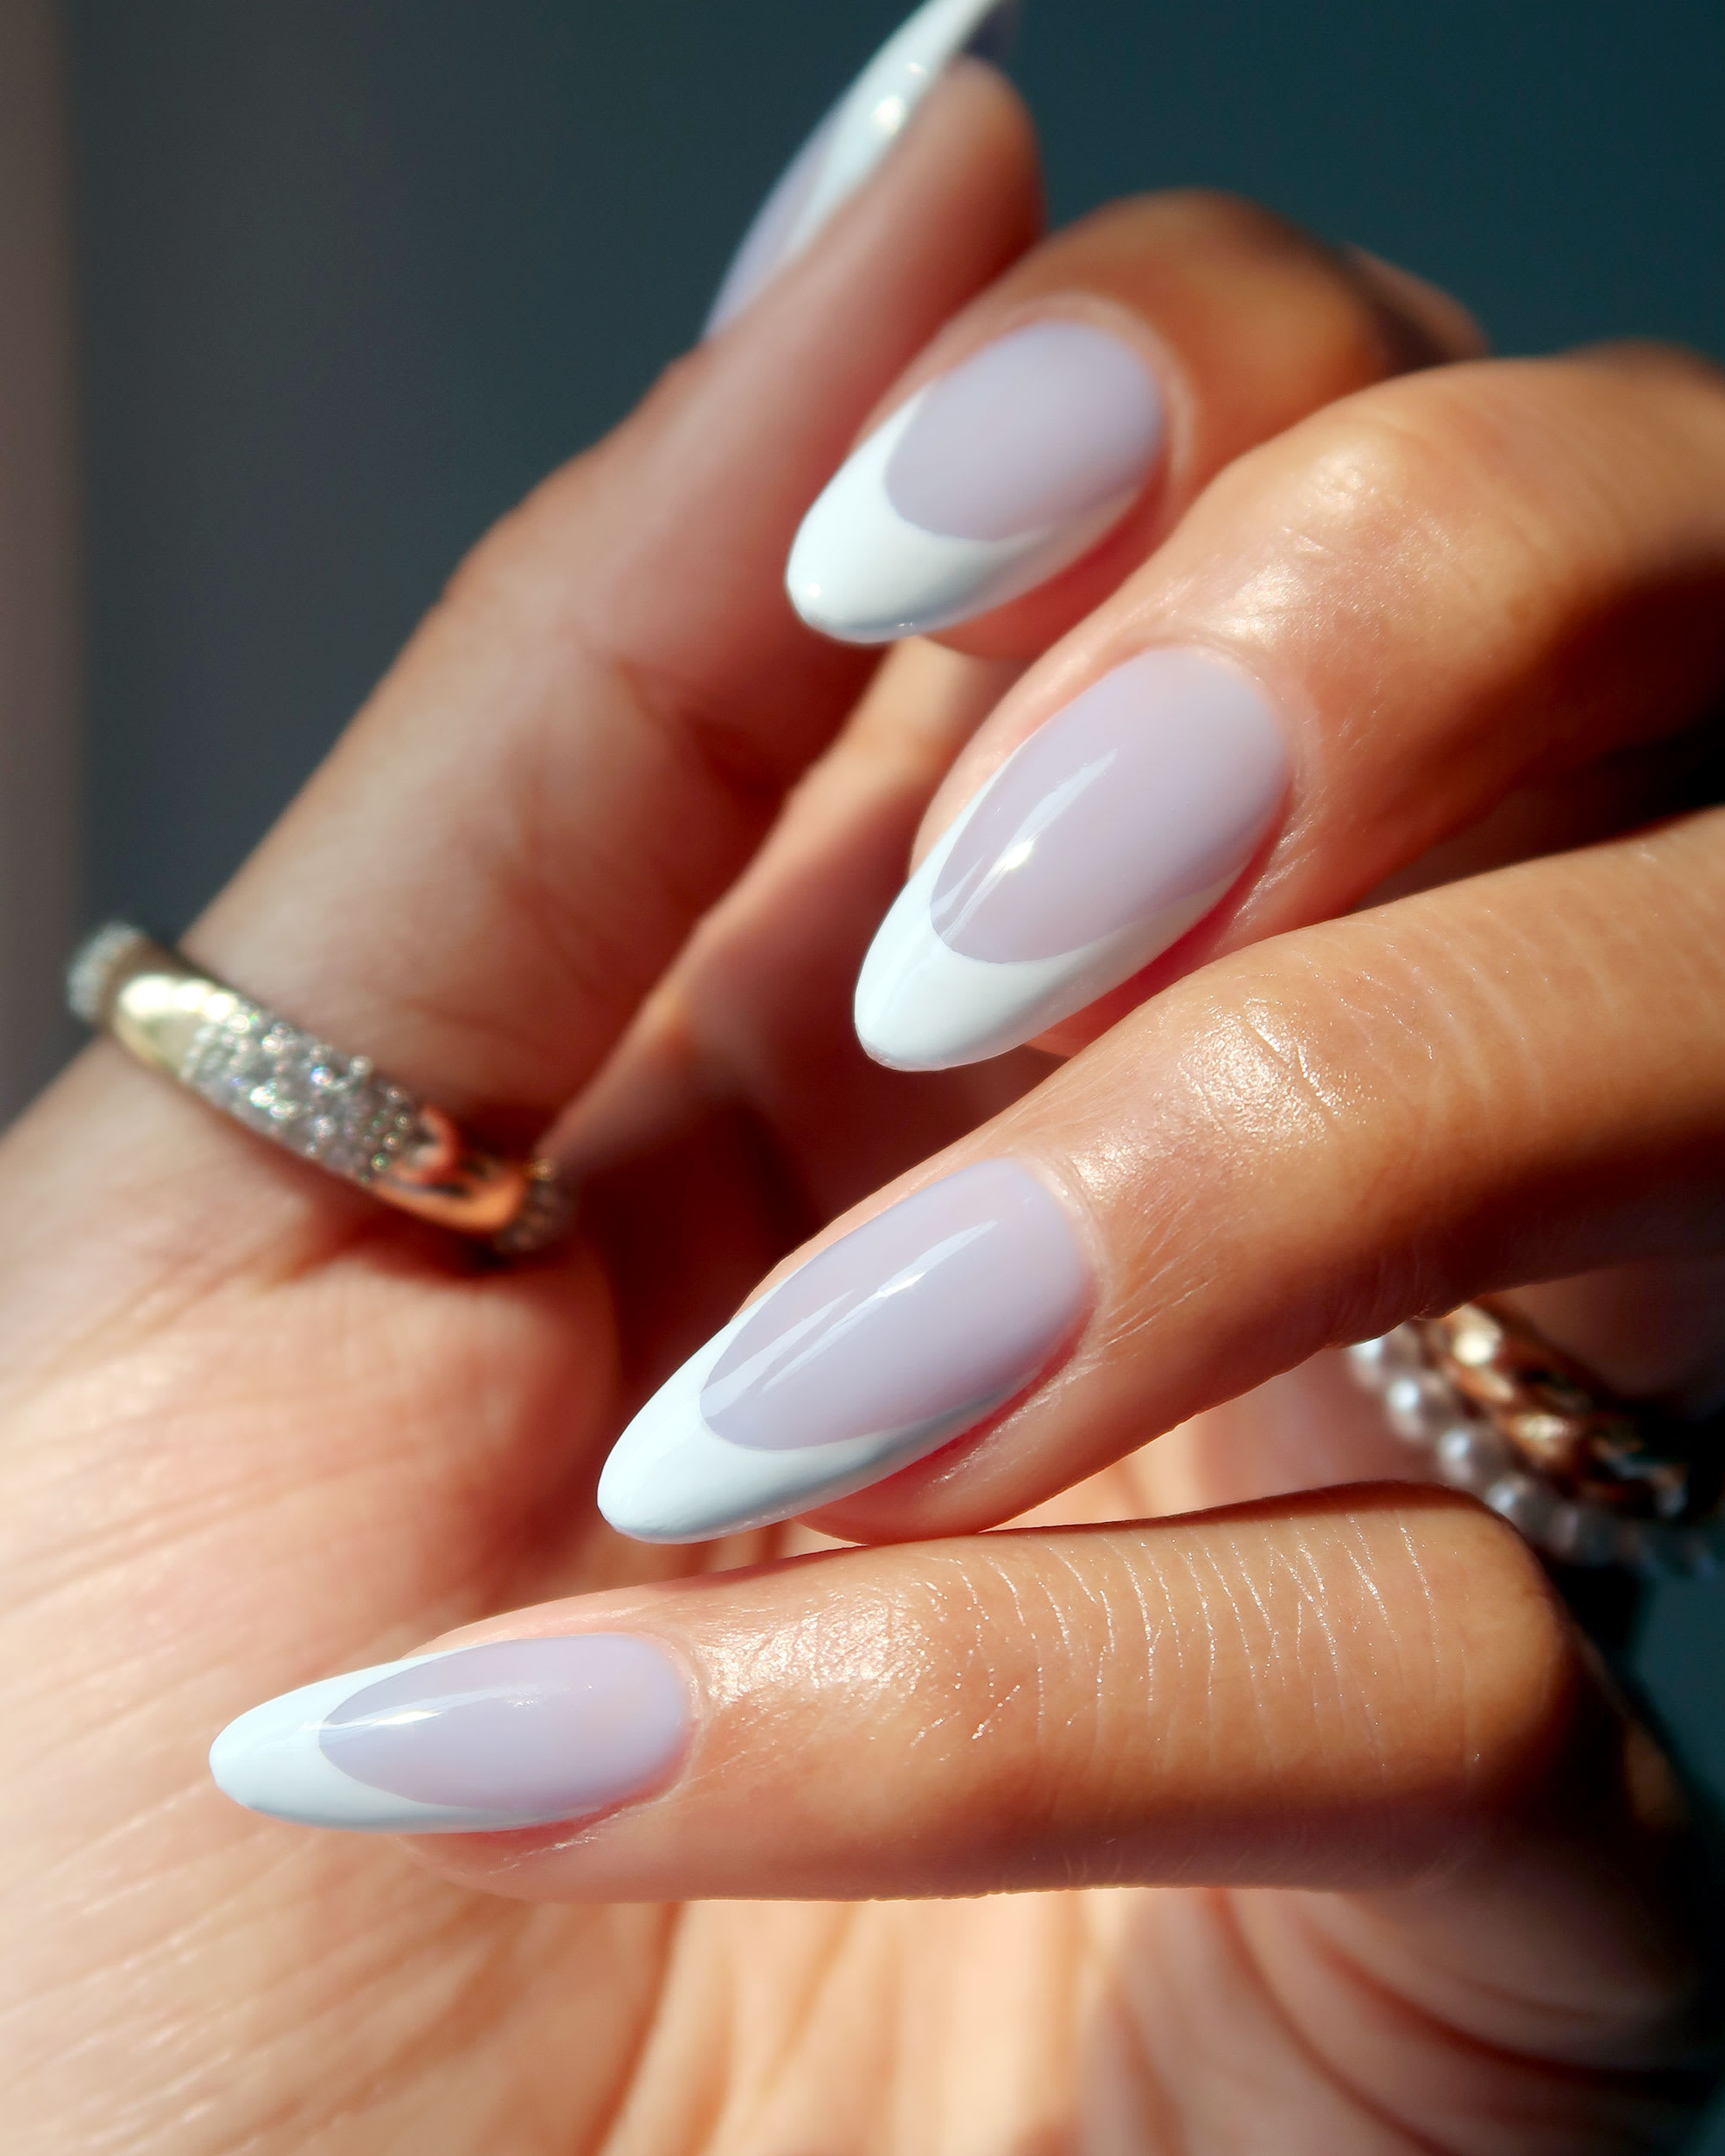 French gel nails - Picture of Nail Garden and SPA, Brighton - Tripadvisor